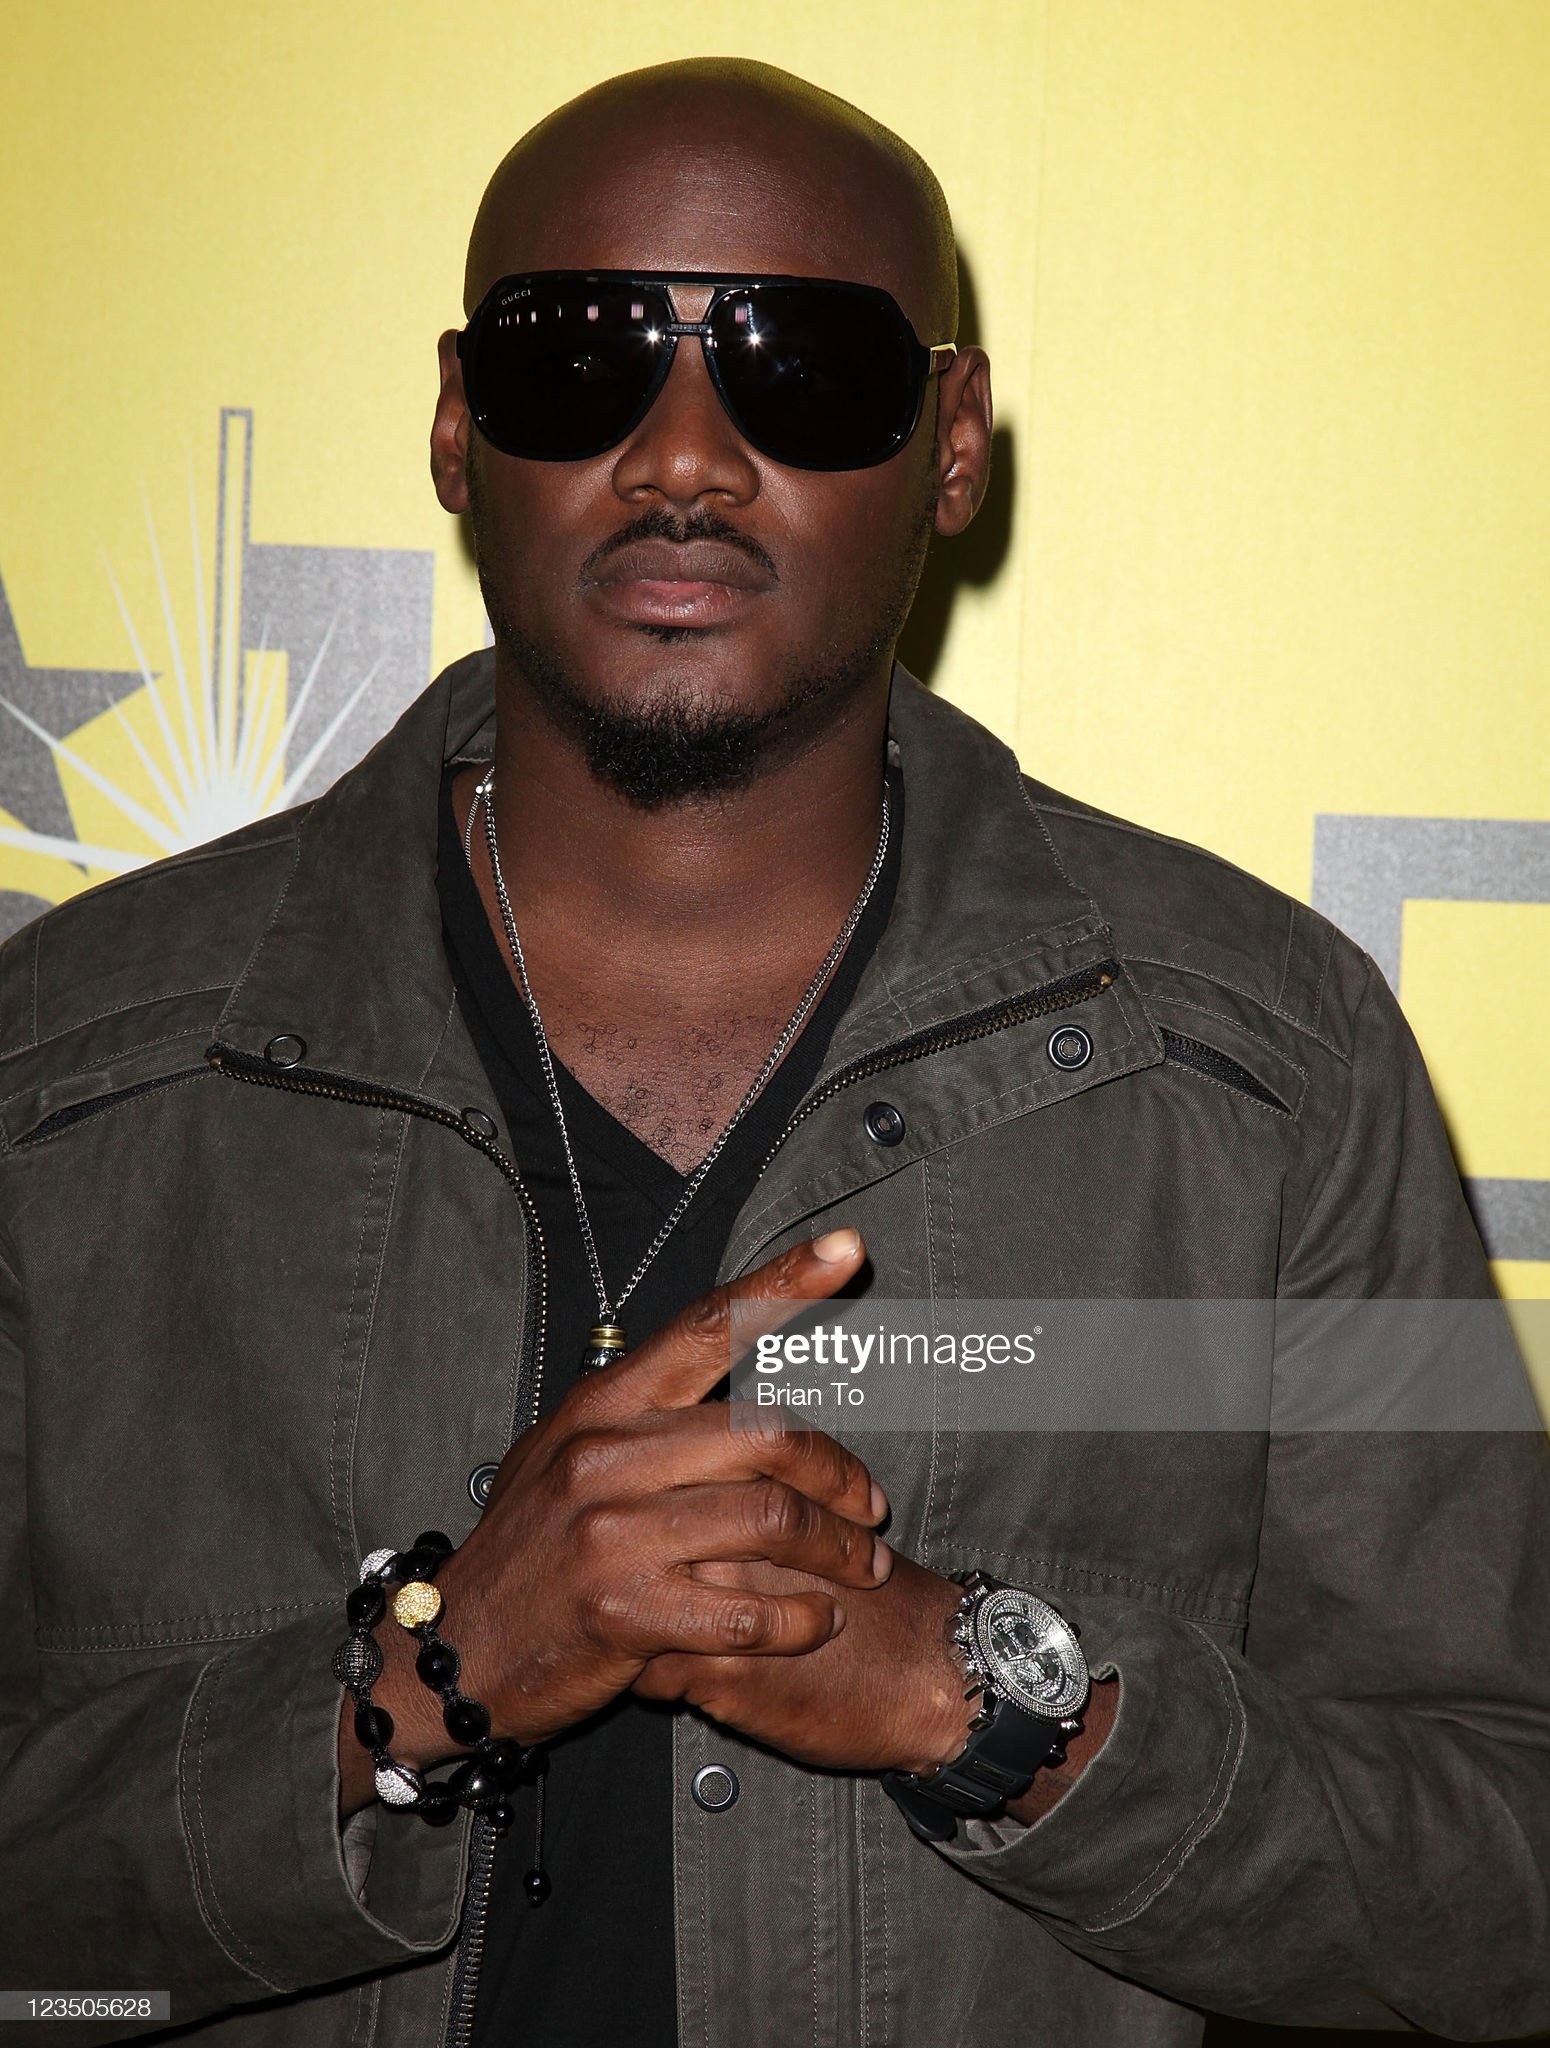 Download: 2FACE IDIBIA – NFANA IBAGA (NO PROBLEM) Mp3 Latest Songs